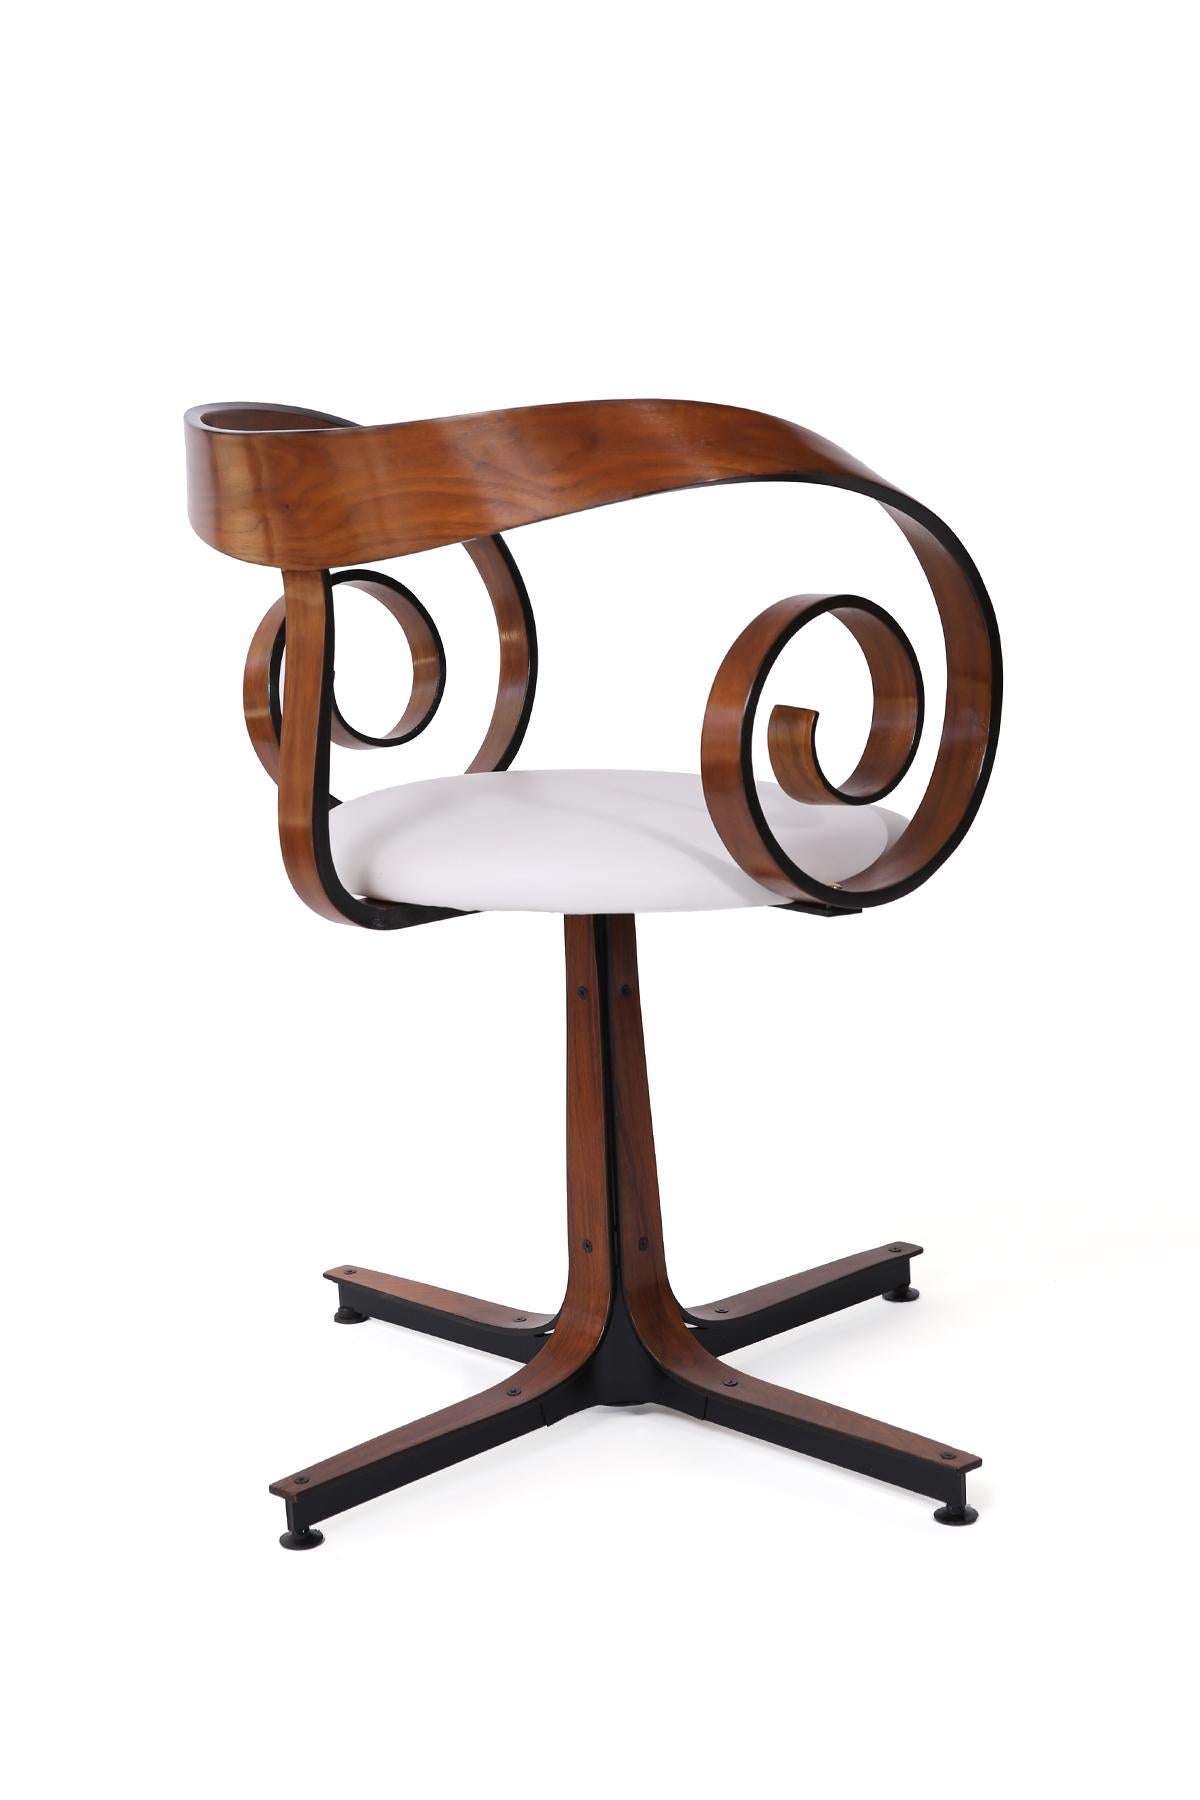 Mid-Century Modern George Mulhauser Walnut and White Leather Sultana Chair for Plycraft, 1950s